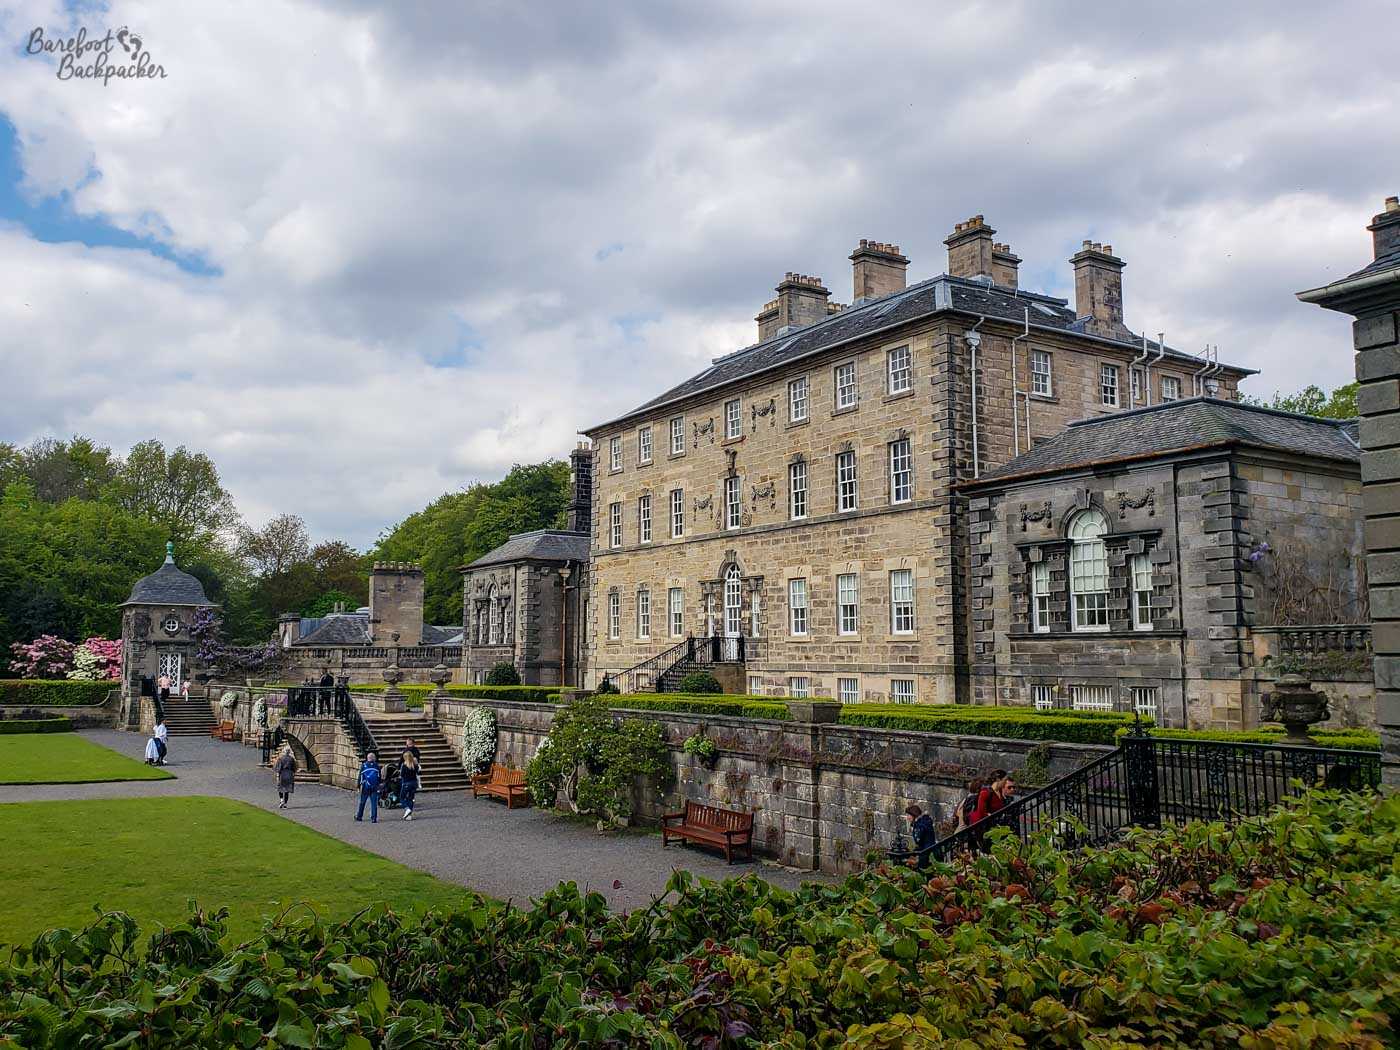 A large rectangular stone house with square windows, it stands on a raised embankment, and there's a wide stone staircase leading up to it. At the bottom and around the staircase are landscaped gardens.